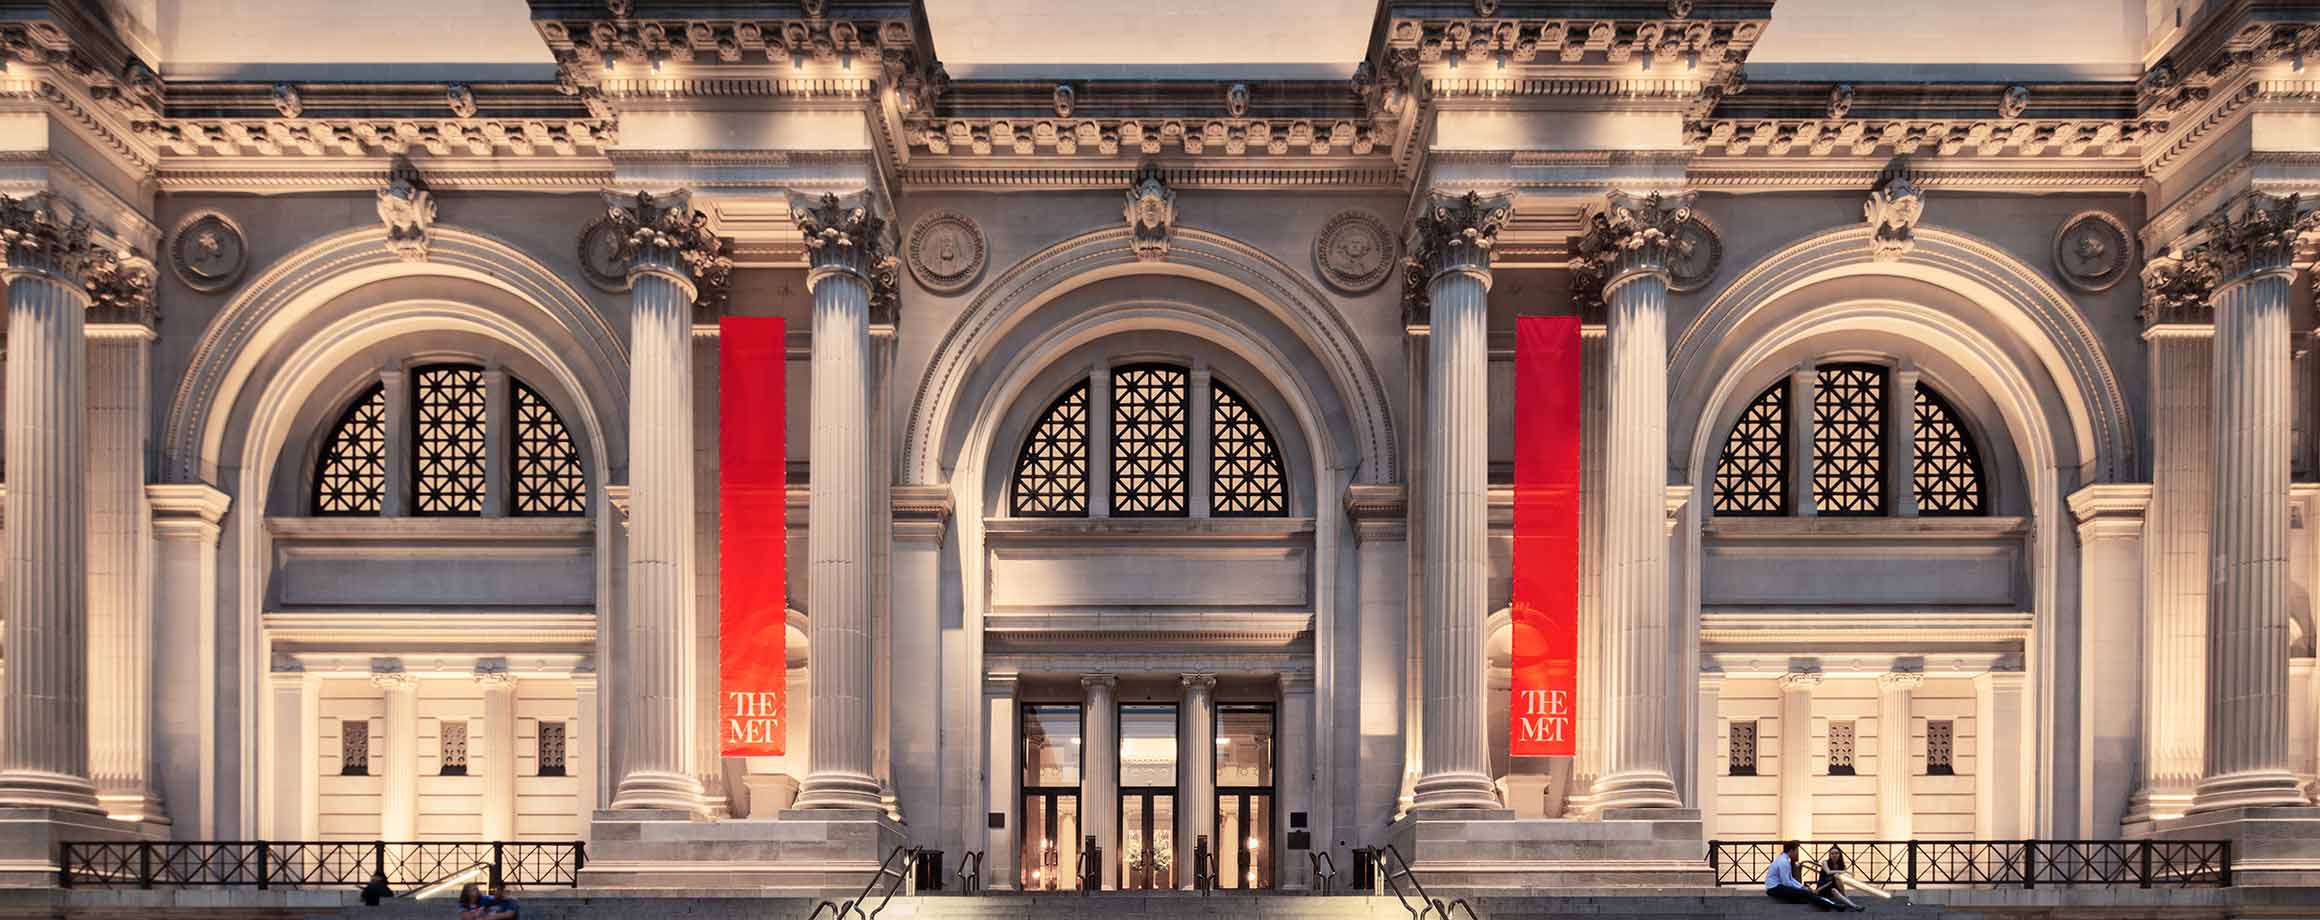 The facade of a building composed of three triumphal arches joined by huge pairs of columns with a very wide tiered staircase leading up to the center arch. Two red Met-branded banners frame the center arch.